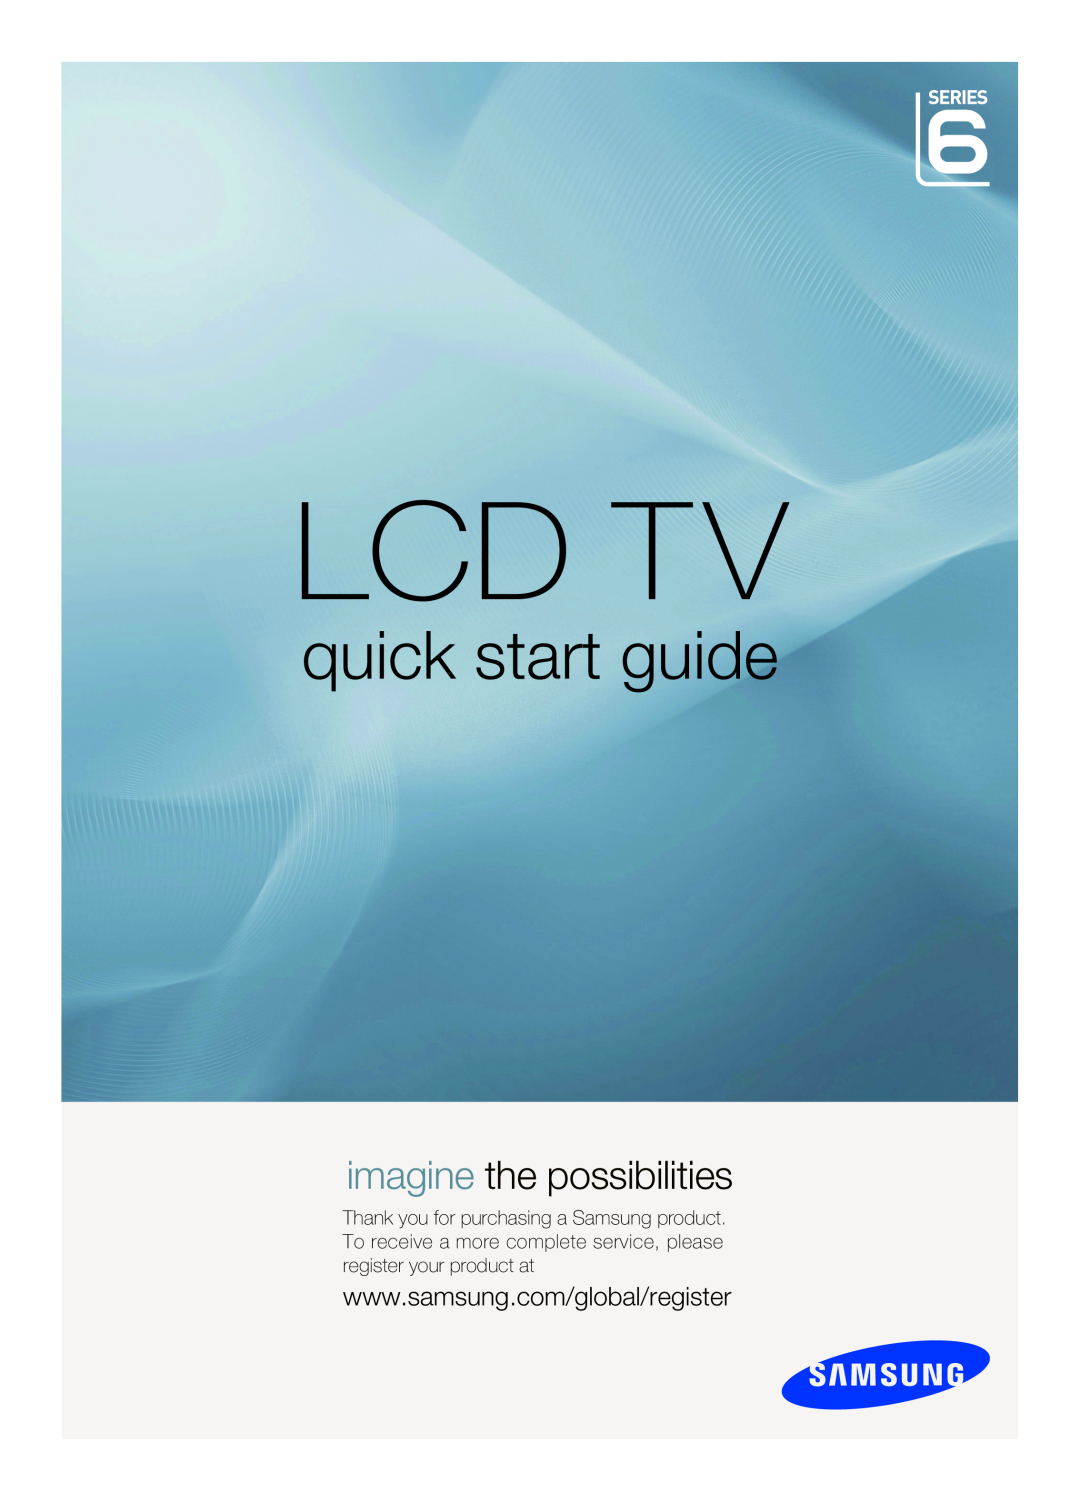 Samsung Series C6 quick start Lcd Tv, quick start guide, imagine the possibilities 